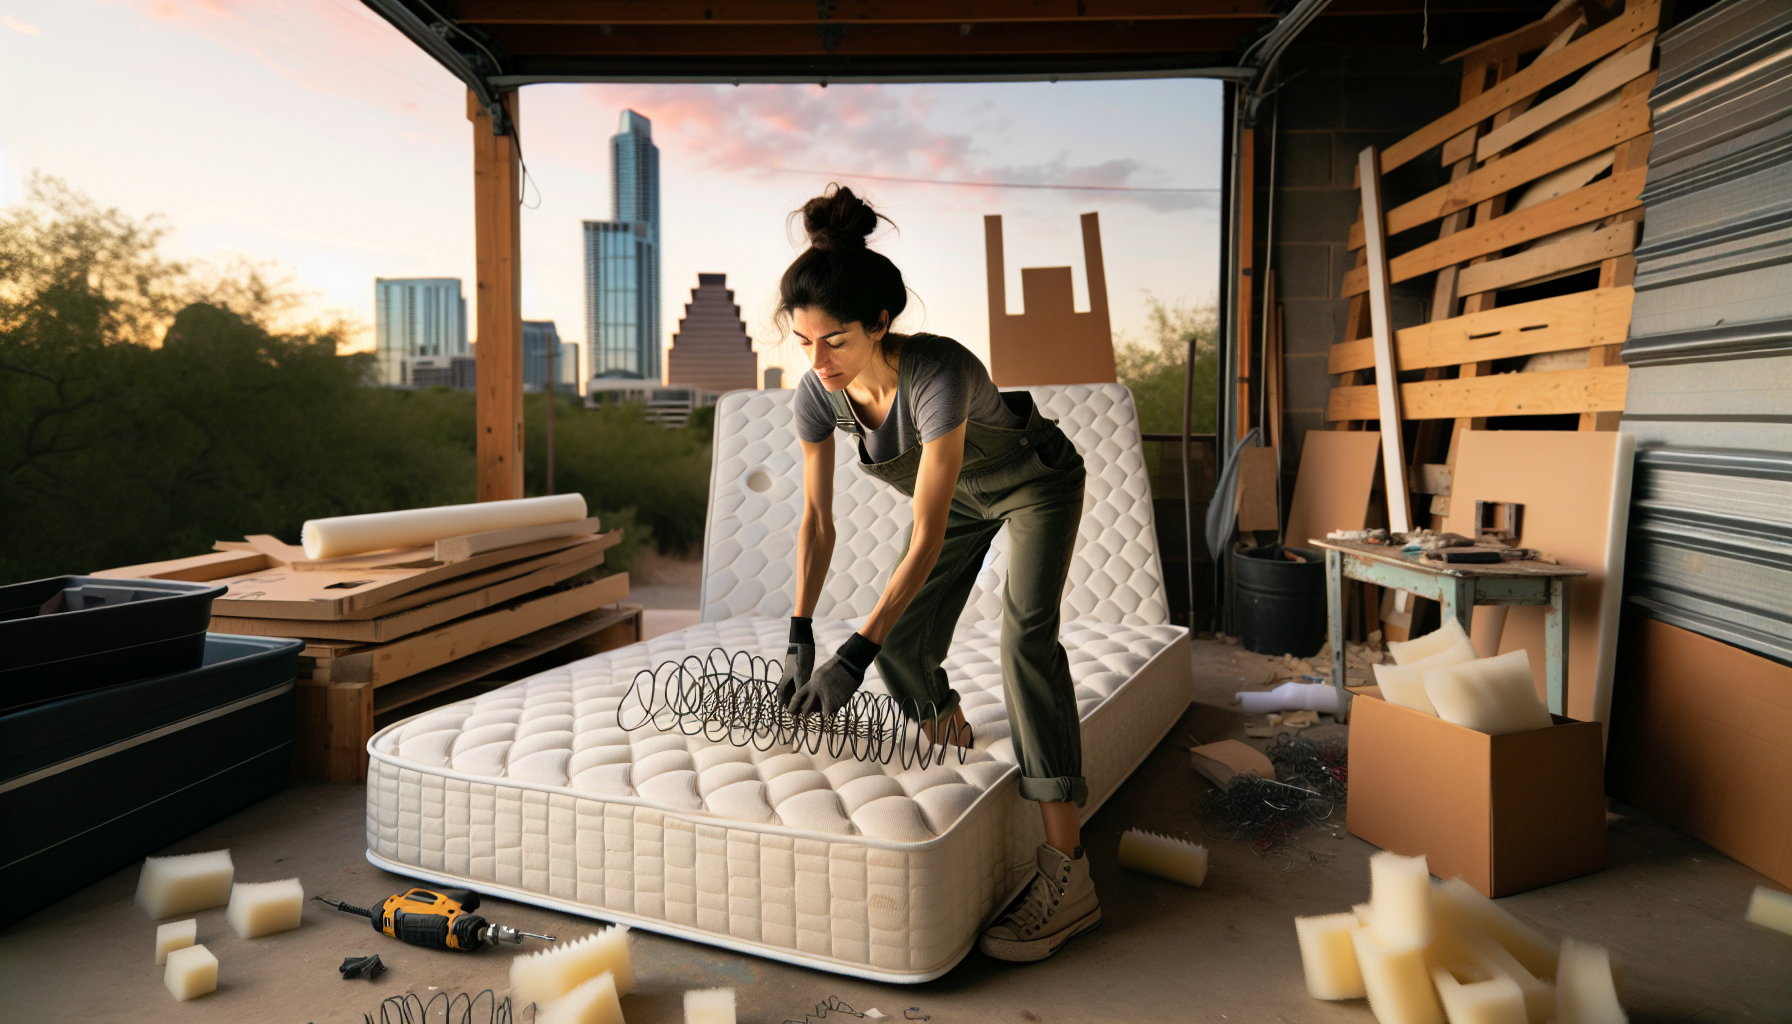 DIY mattress recycling project at home in Austin